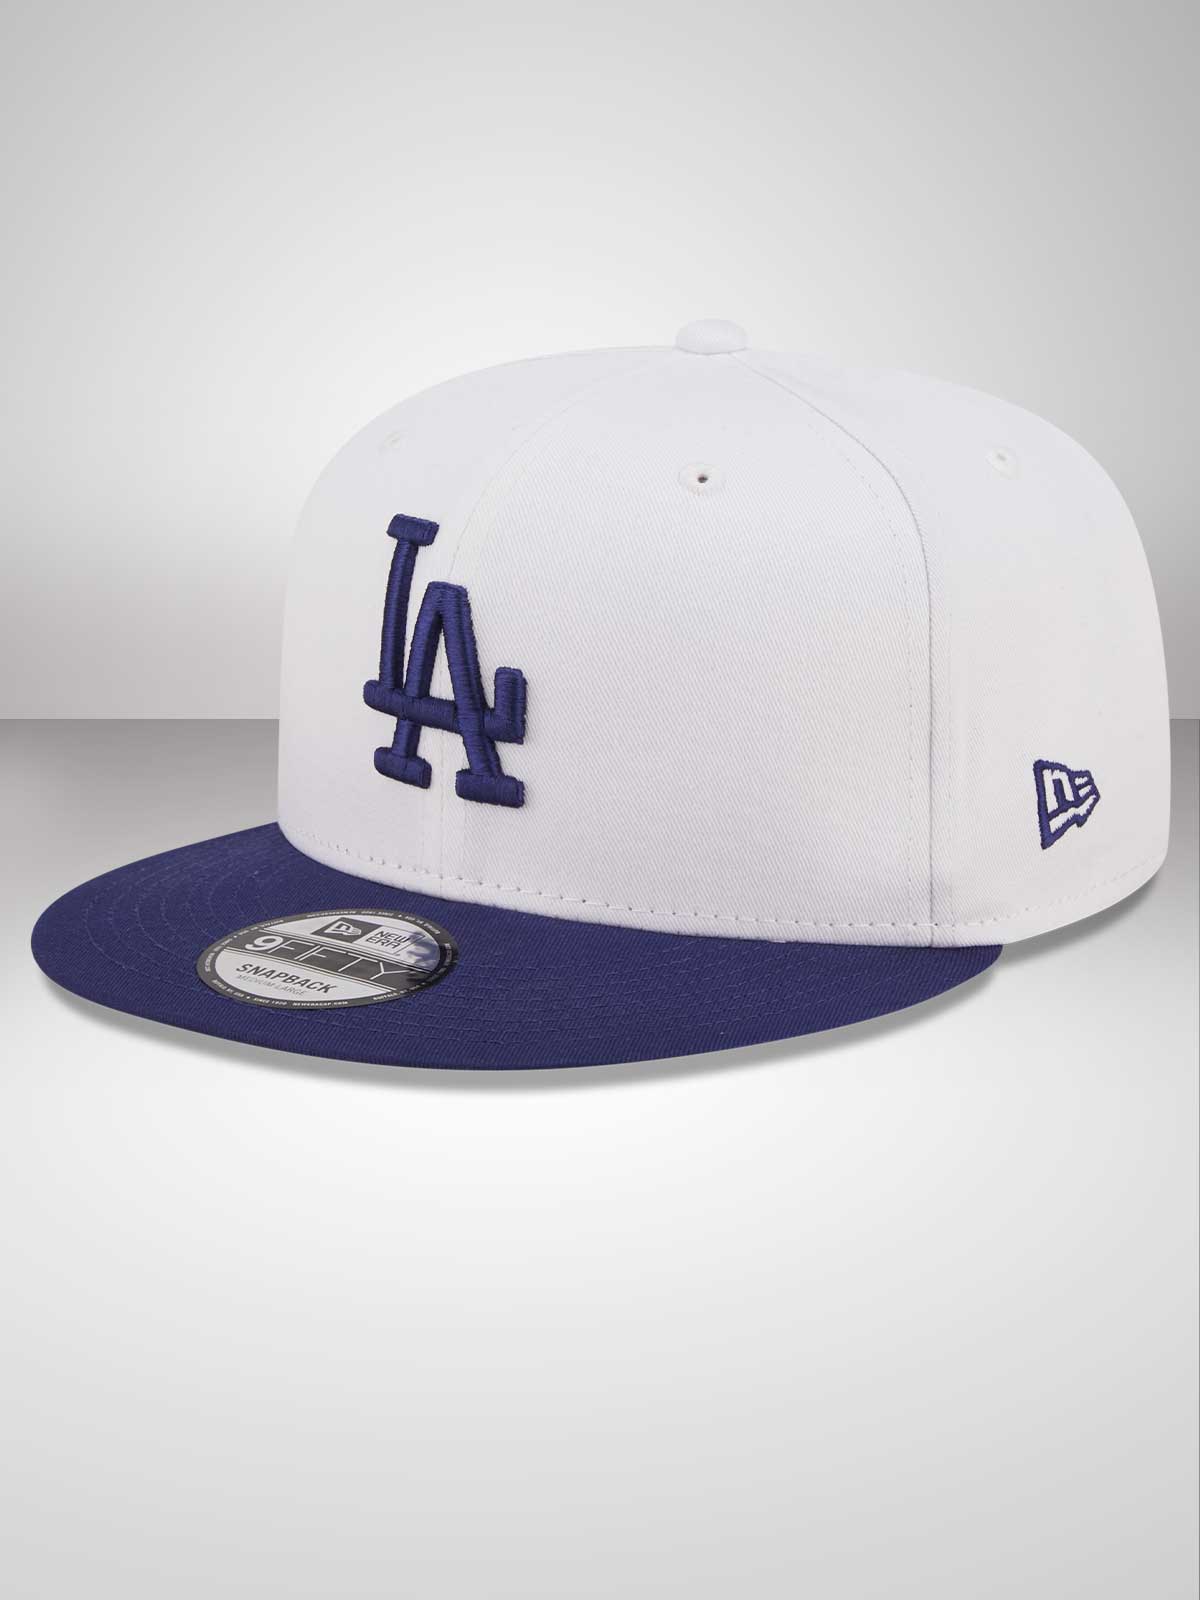 New Era Los Angeles Dodgers Black White Logo Snapback Cap 9fifty Limited  Edition : Sports & Outdoors 